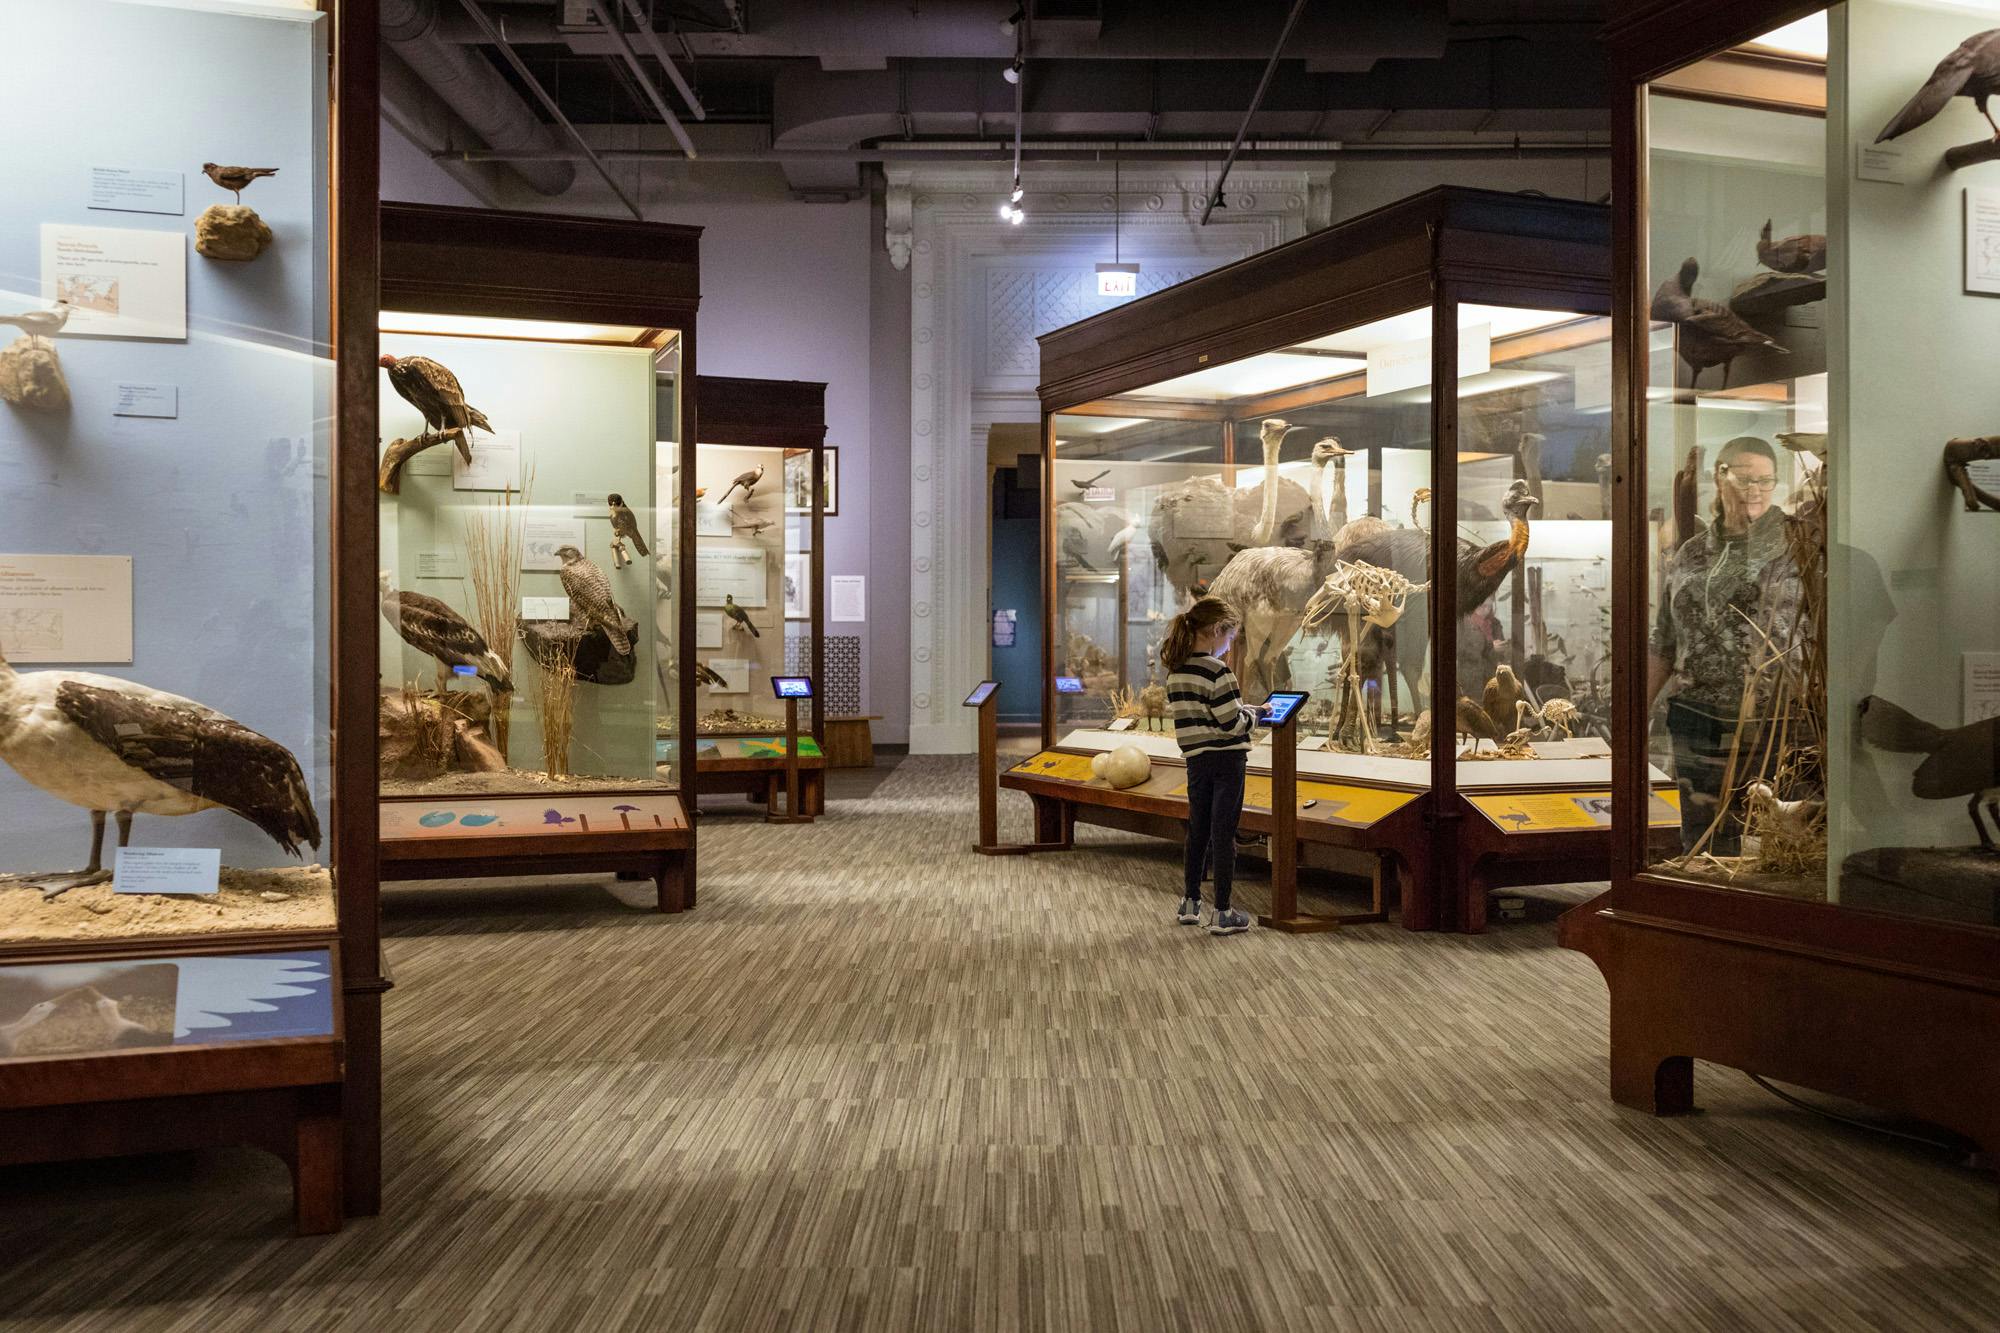 A kid stands in the middle of a gallery, looking at an interactive screen outside a display case full of large flightless birds. There are four other display cases with taxidermied birds in the room. In the right foreground, another visitor can be seen through the glass of a display, looking at the specimens inside.